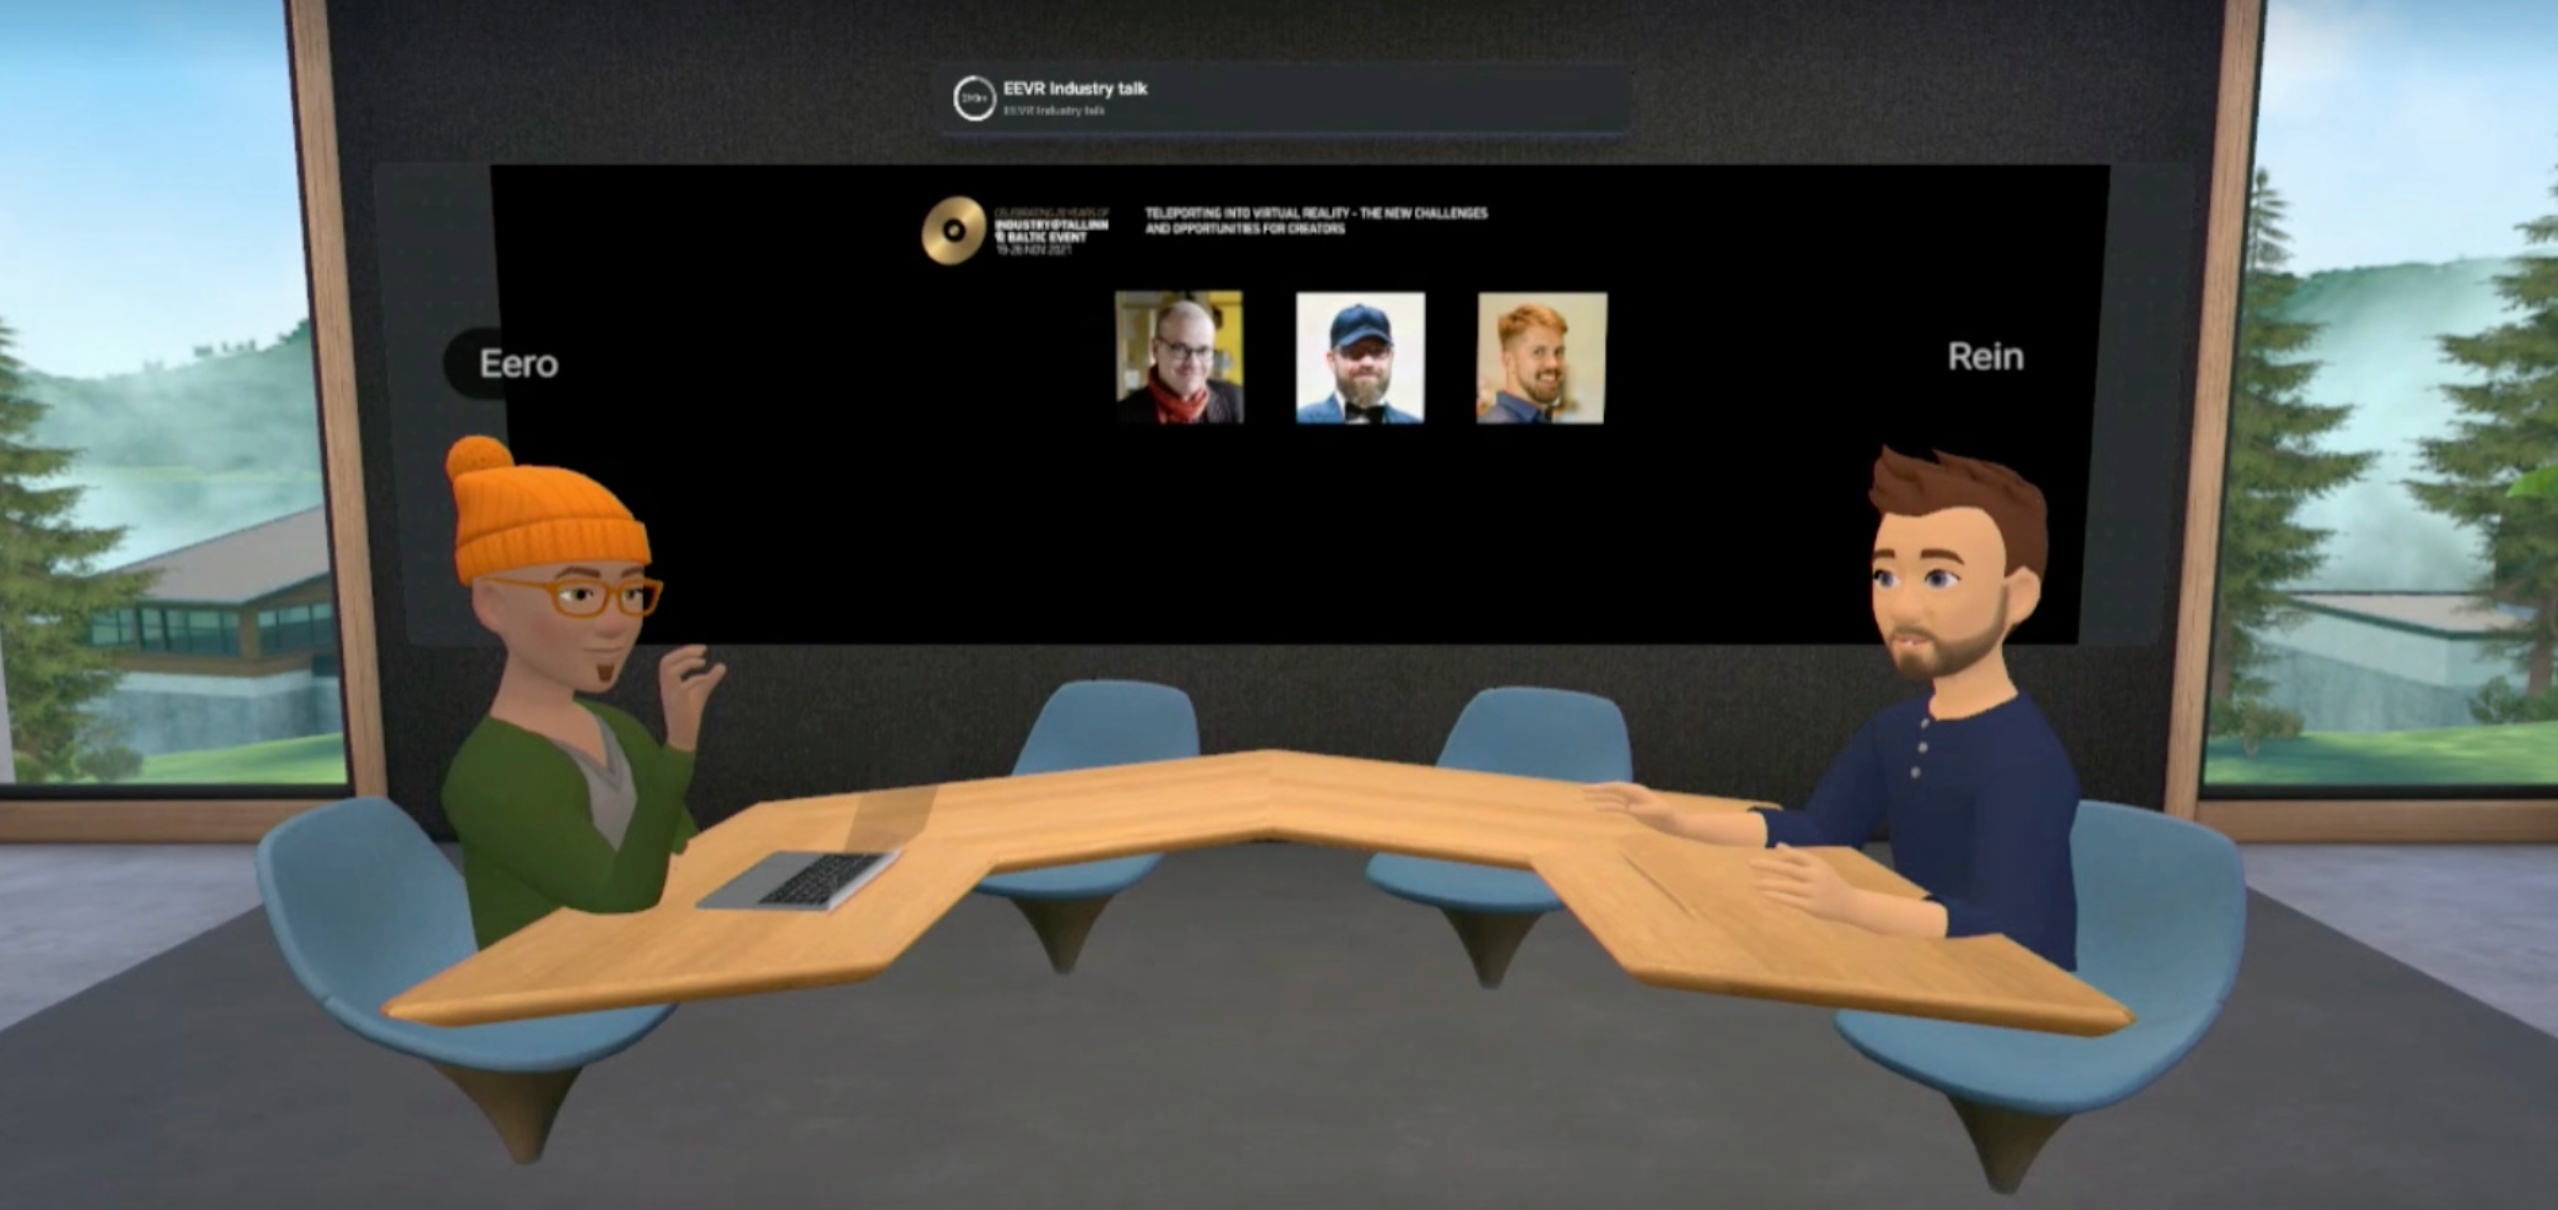 ind.virtual reality panel